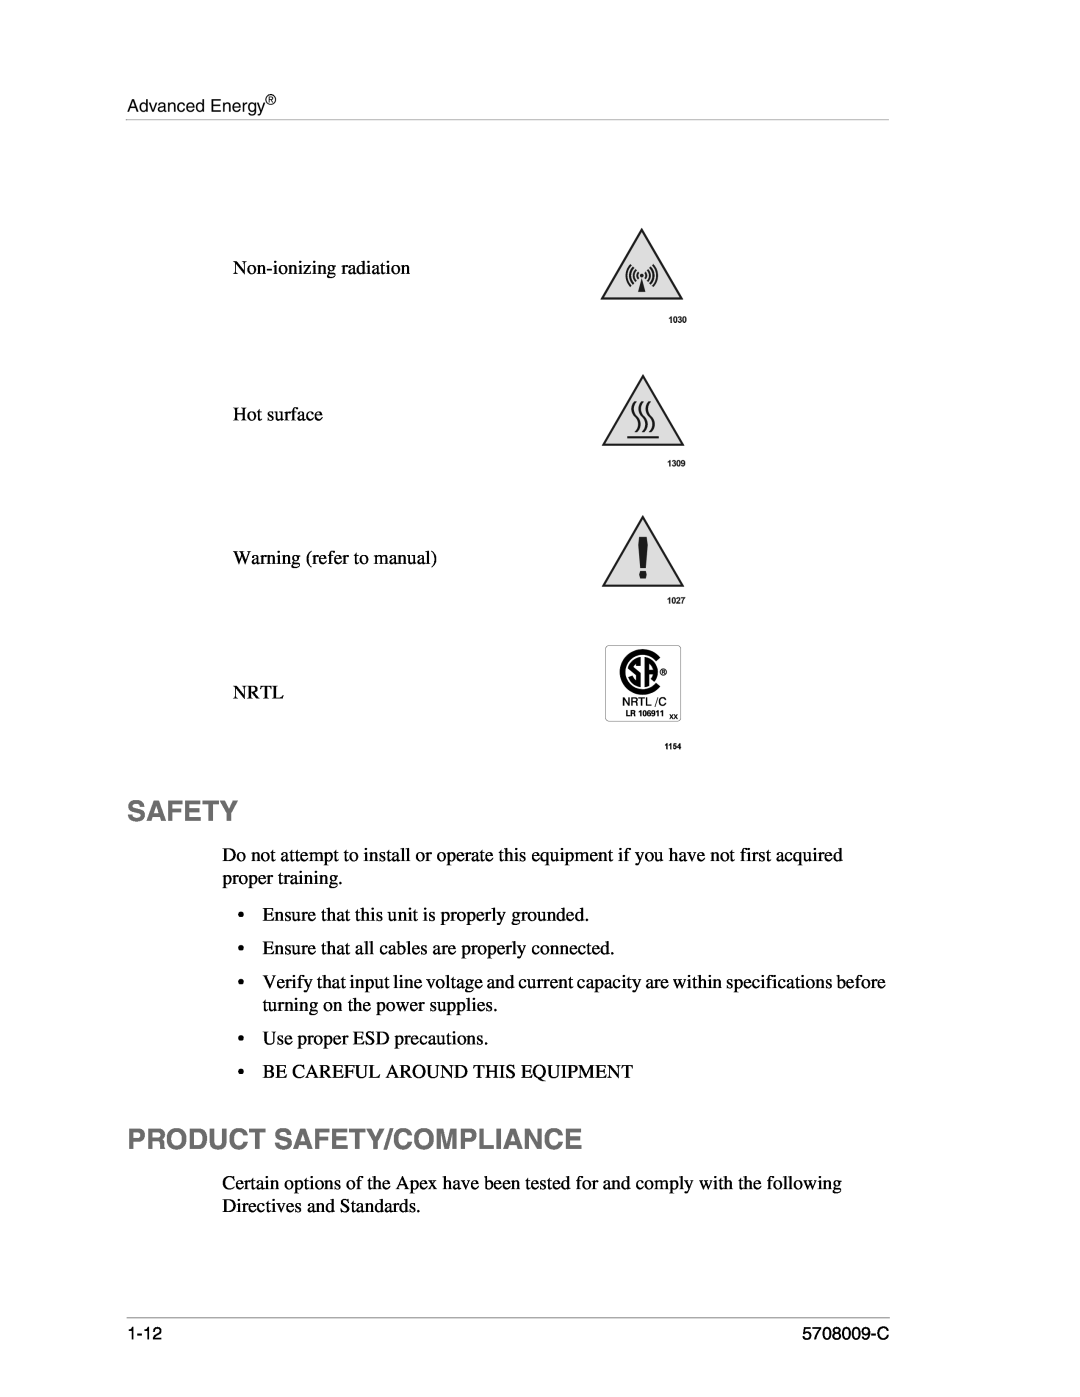 Apex Digital 5708009-C manual Product Safety/Compliance 